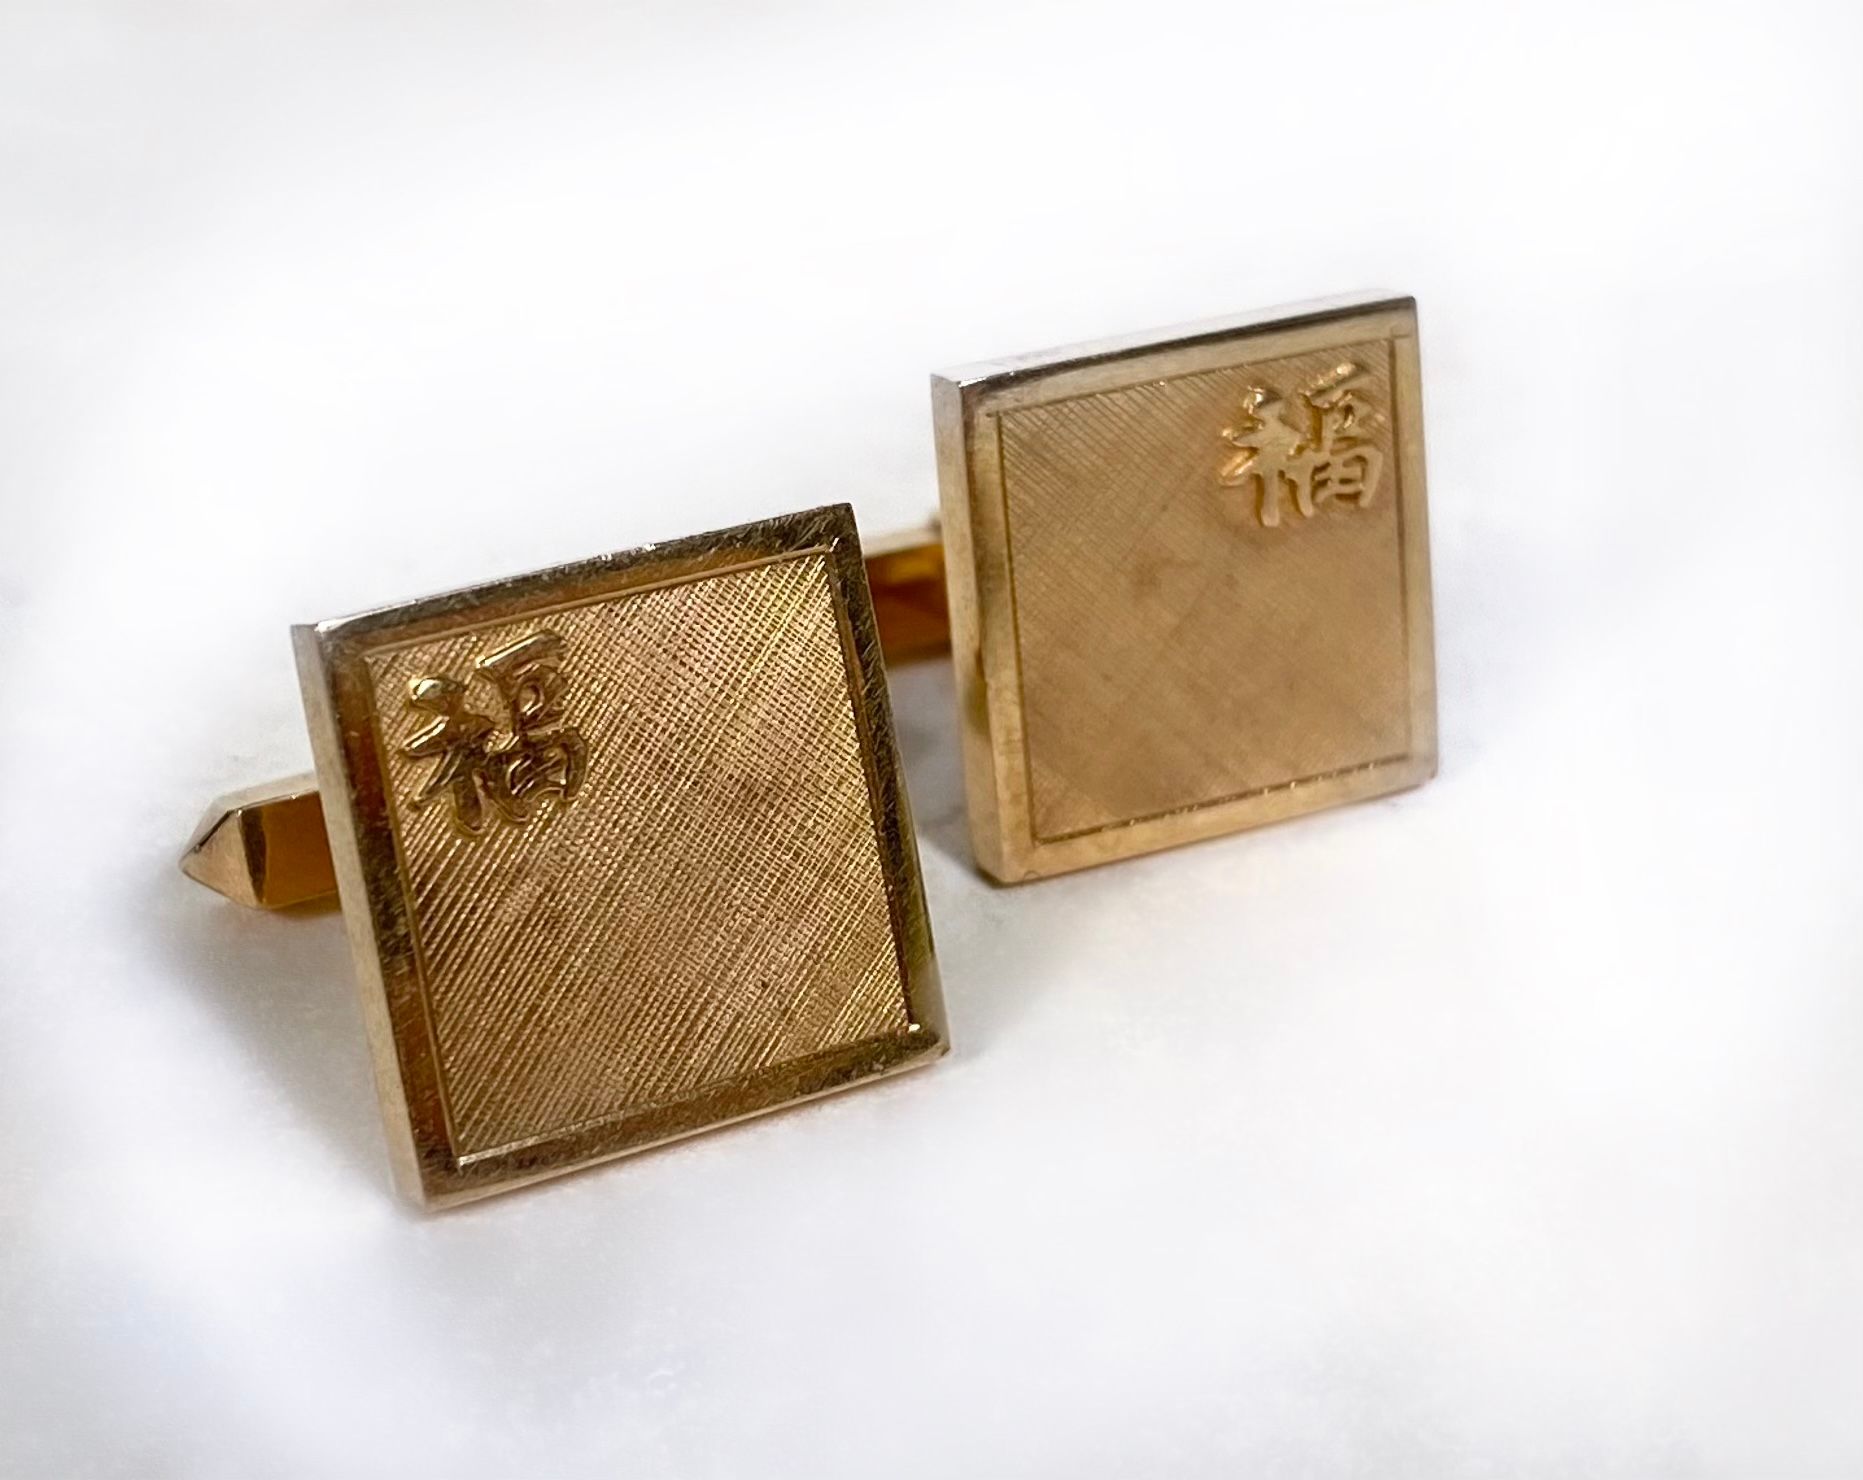 Null Pair of square gold cufflinks with Fu character 

10.1 grams